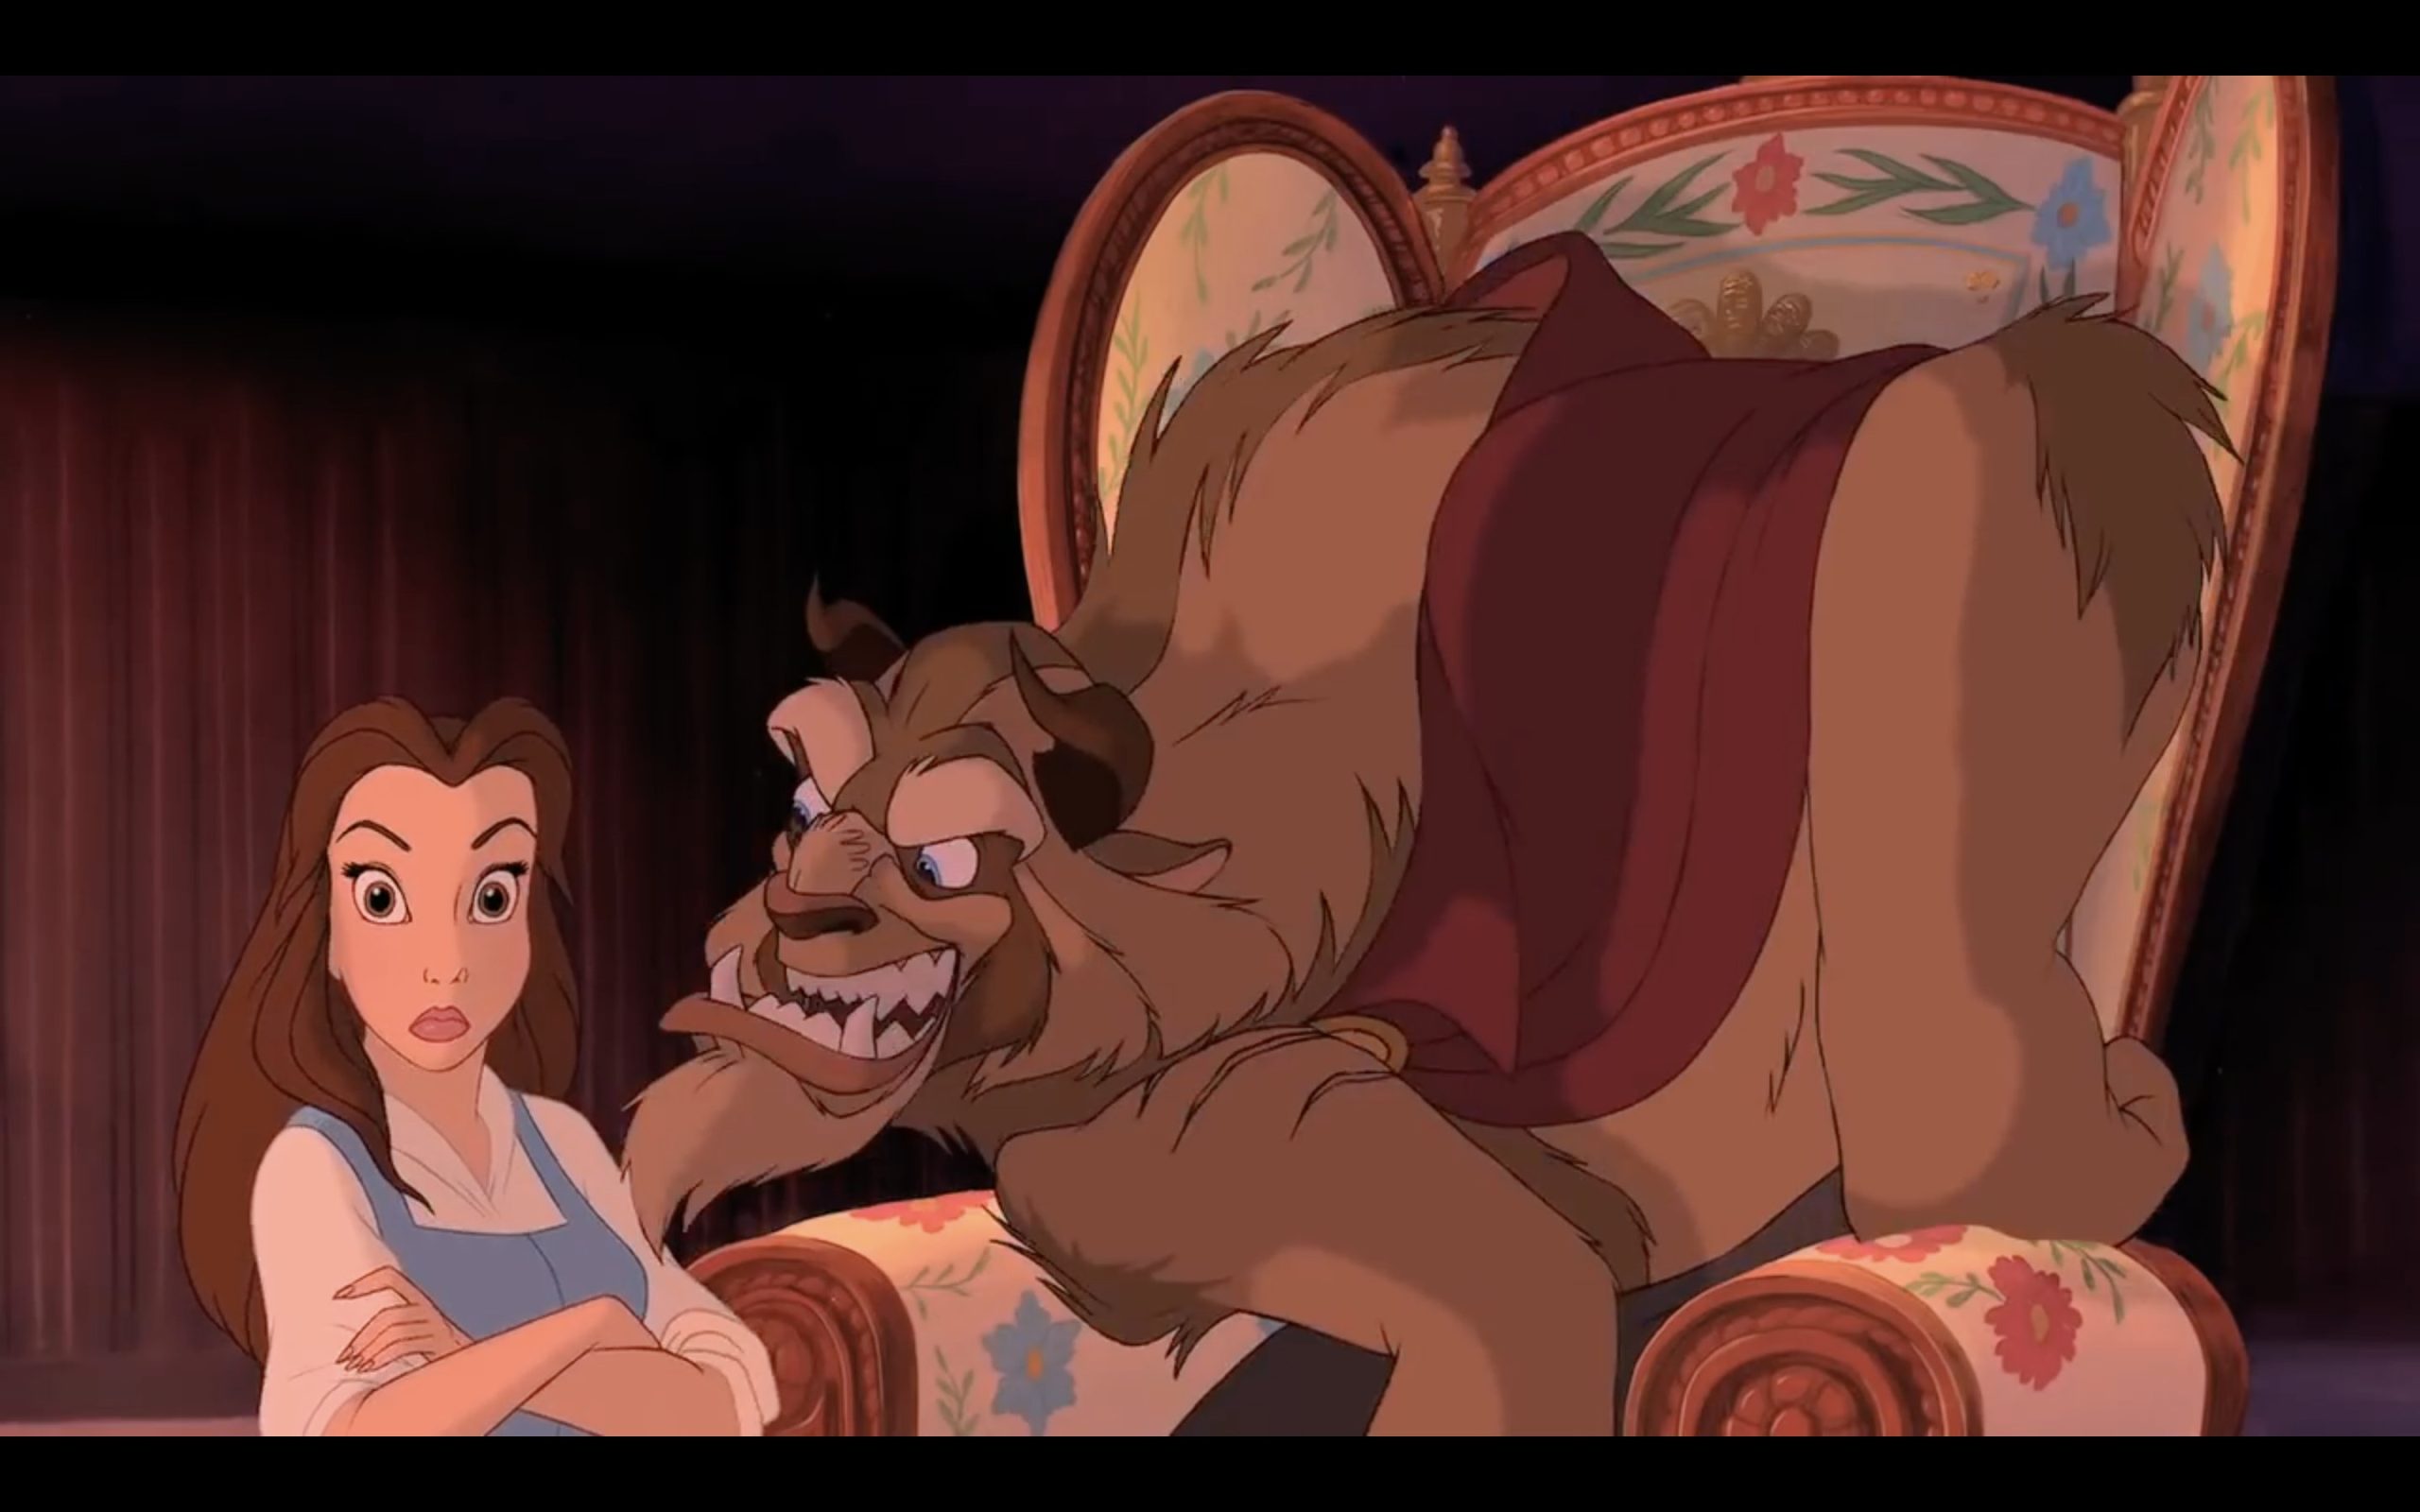 Where Does Beauty and the Beast Take Place?